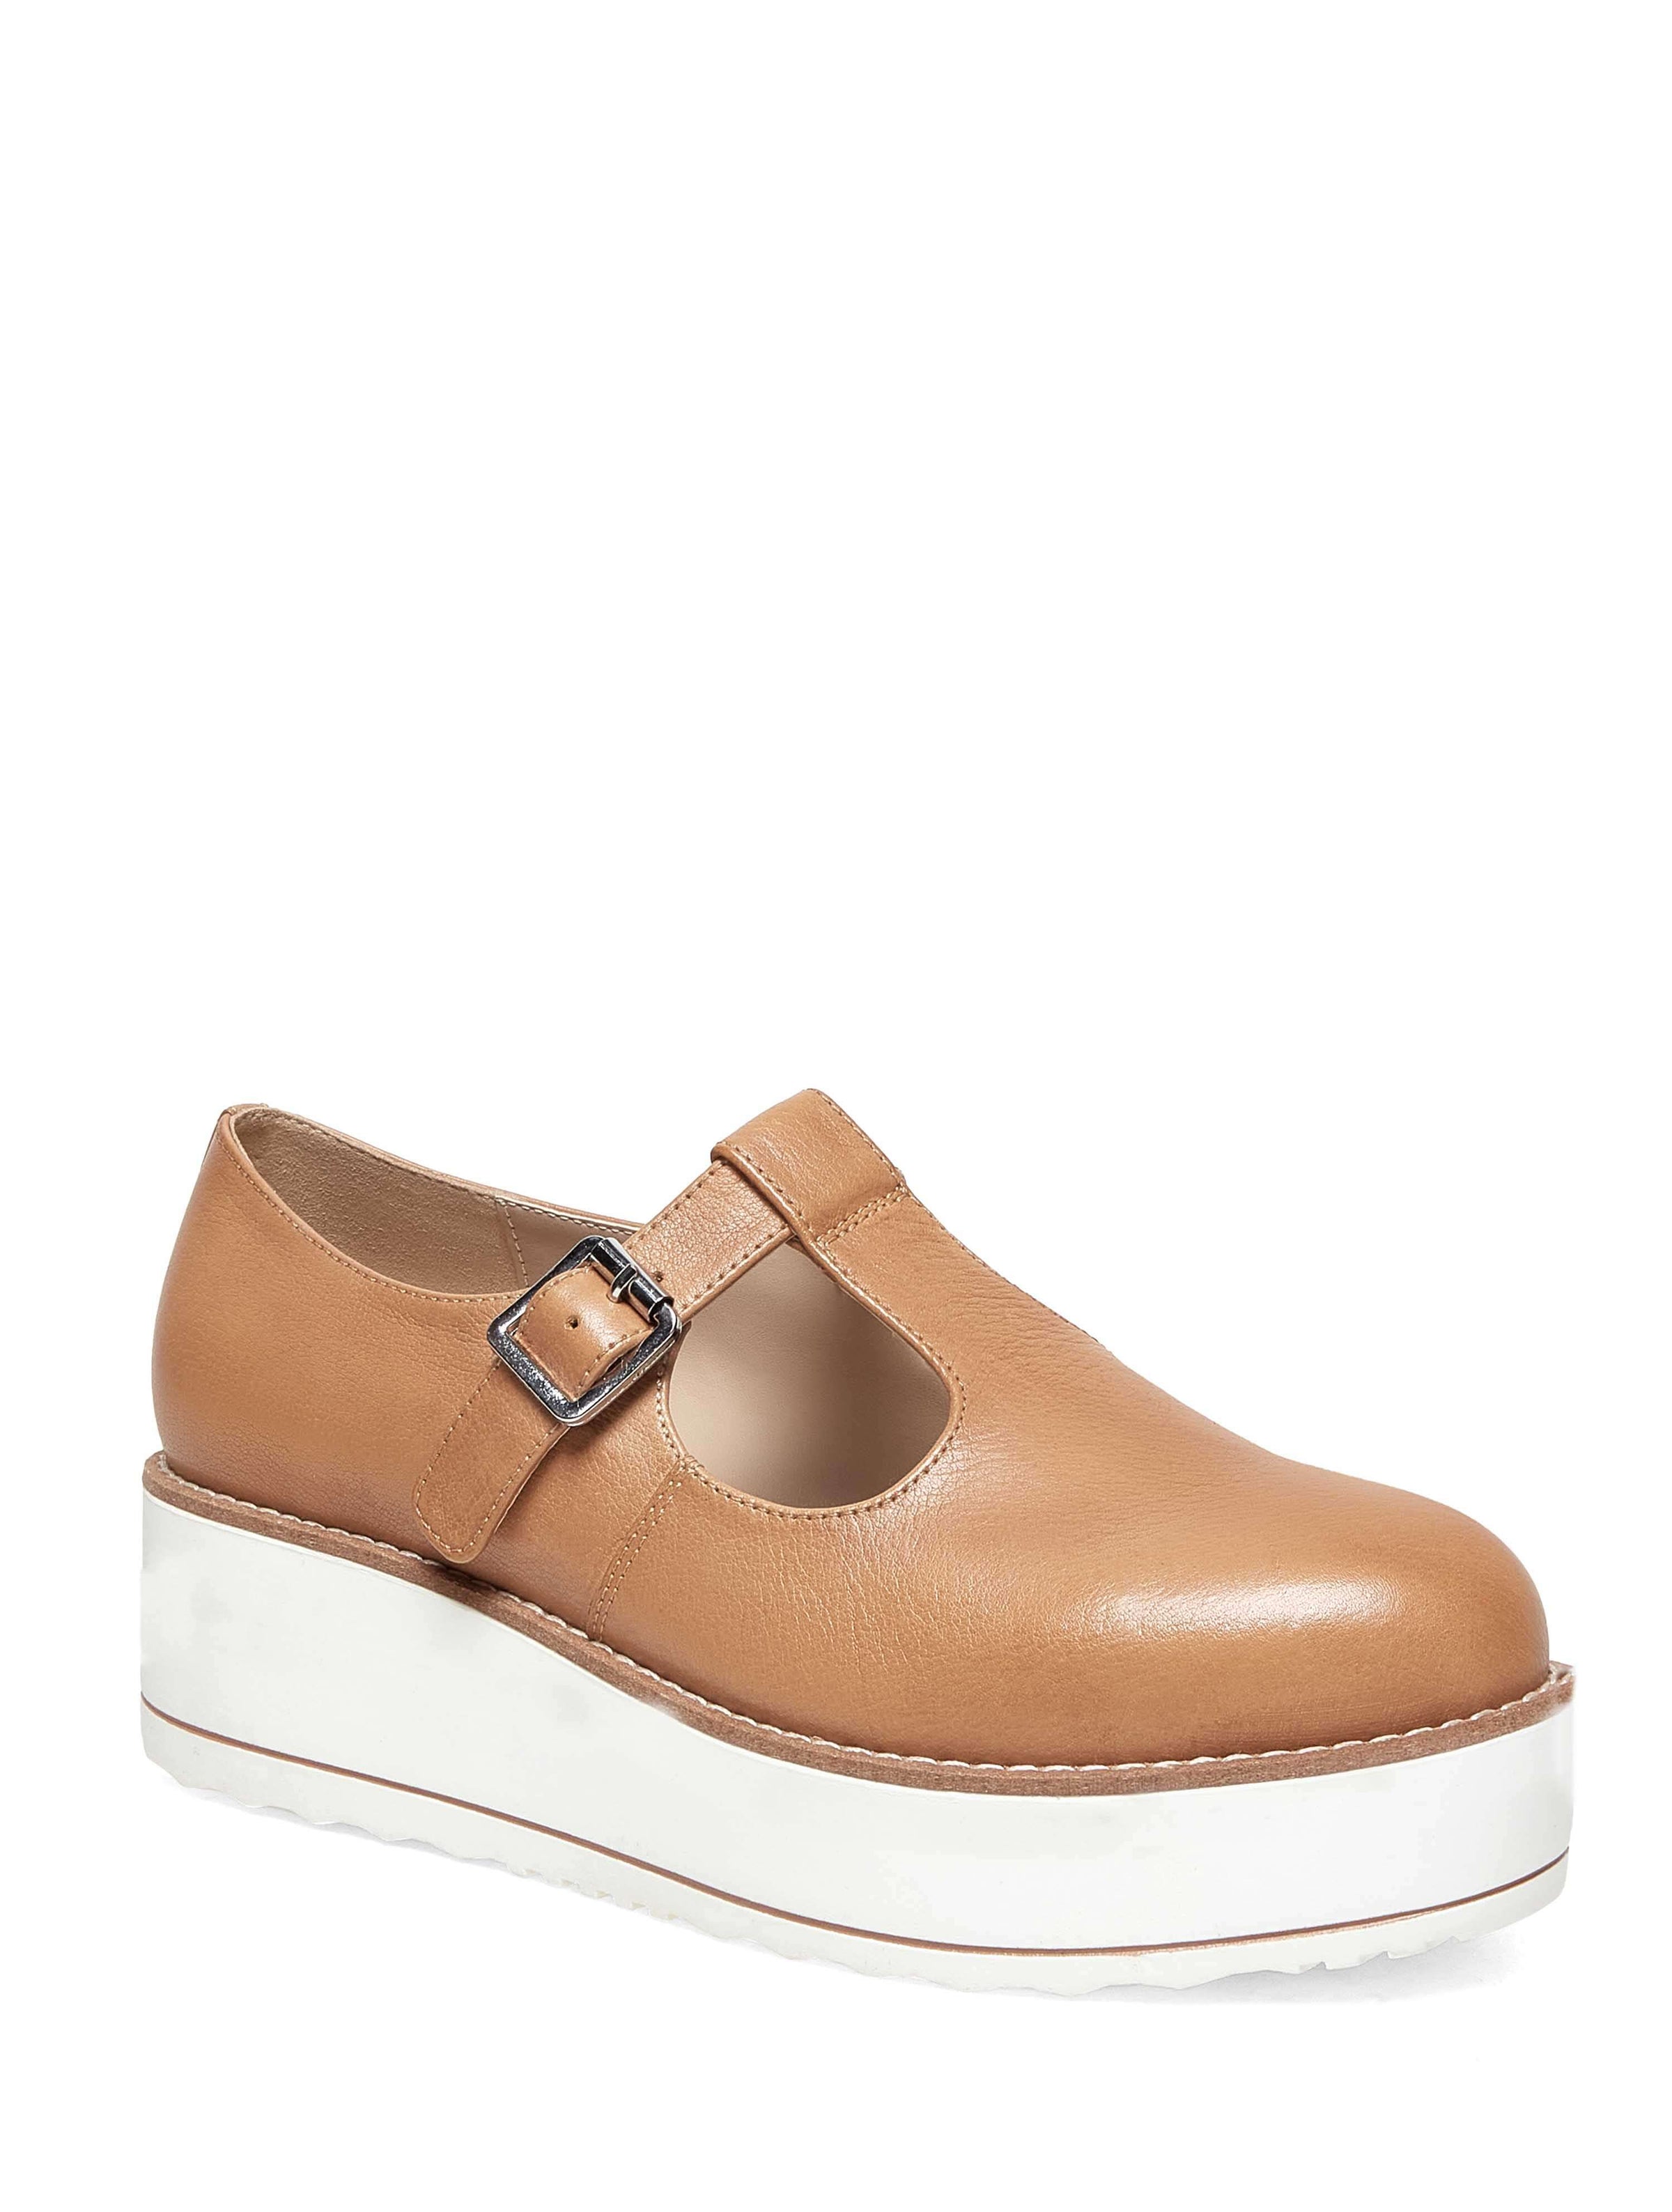 Silent D Nora Mary Jane Sneaker in Tan